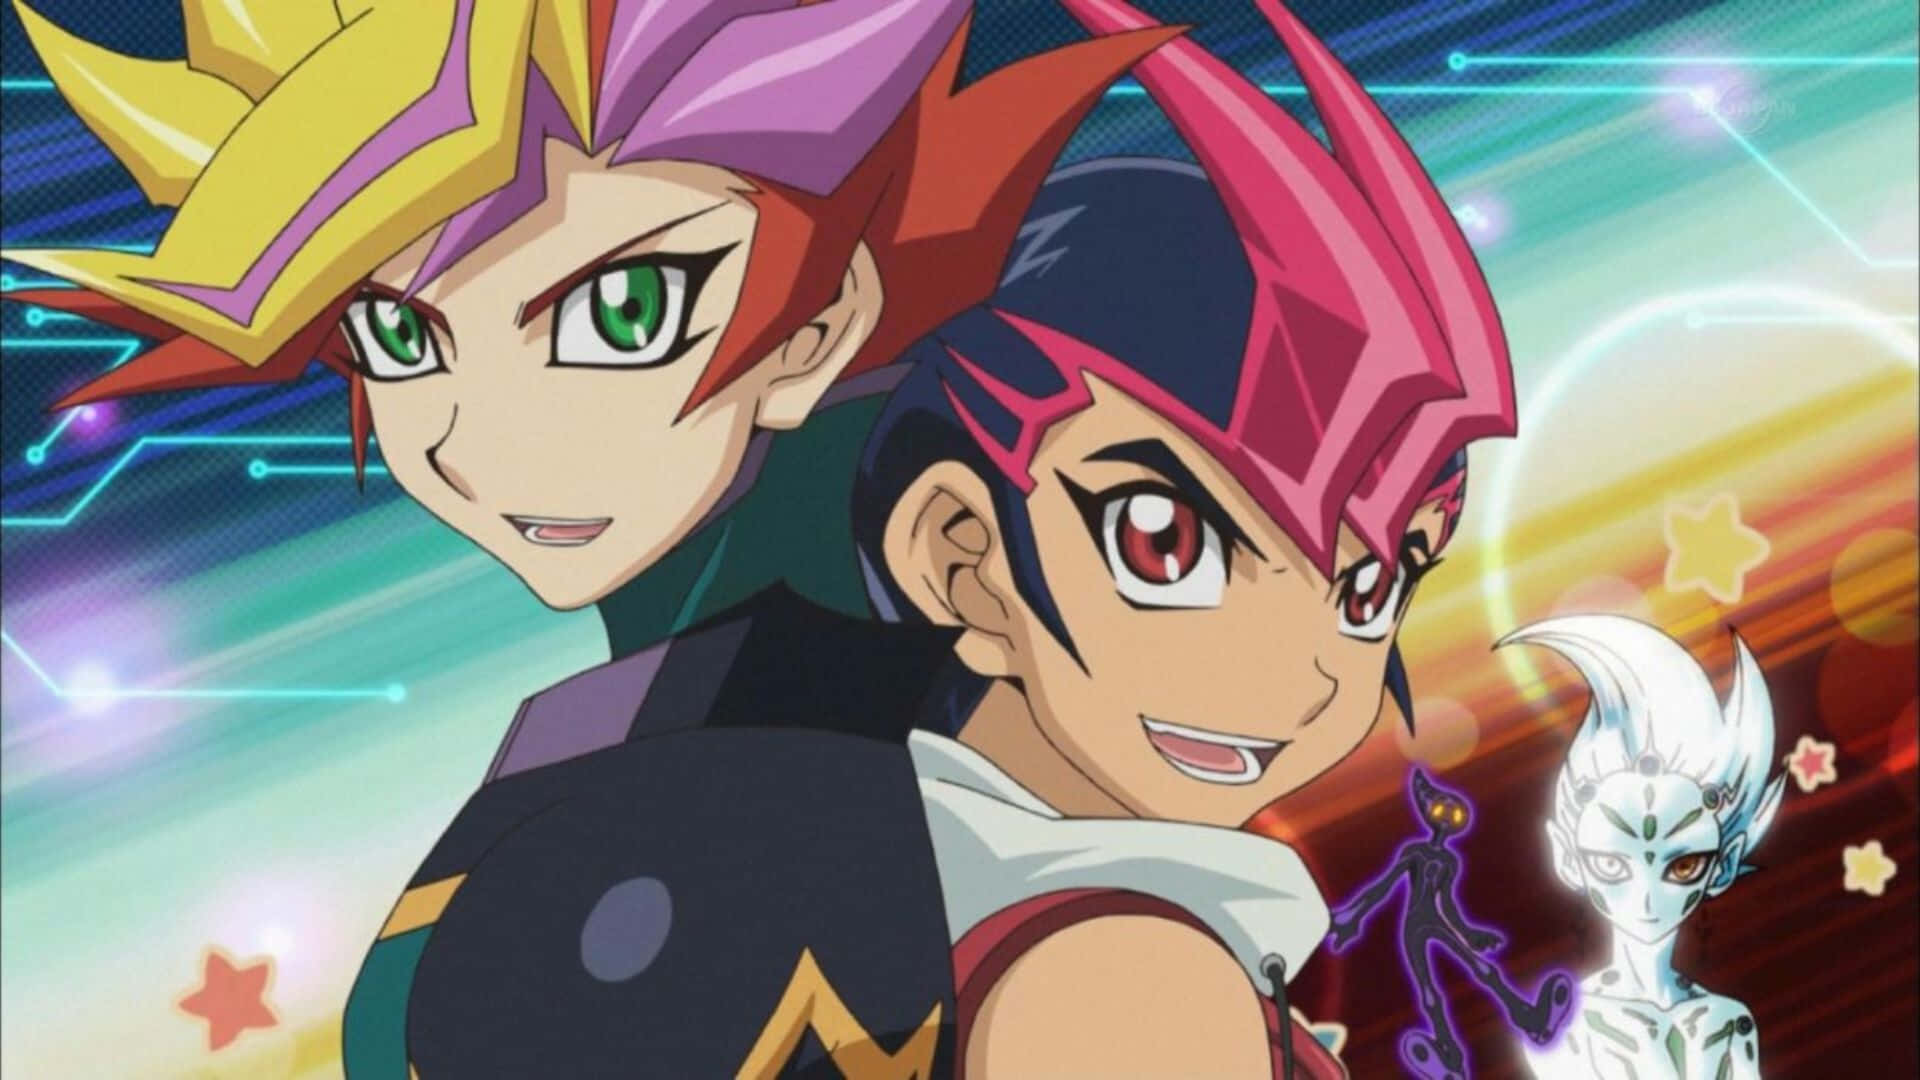 Yugi Muto and Astral, the otherworldly duo in Yu-Gi-Oh! ZEXAL Wallpaper